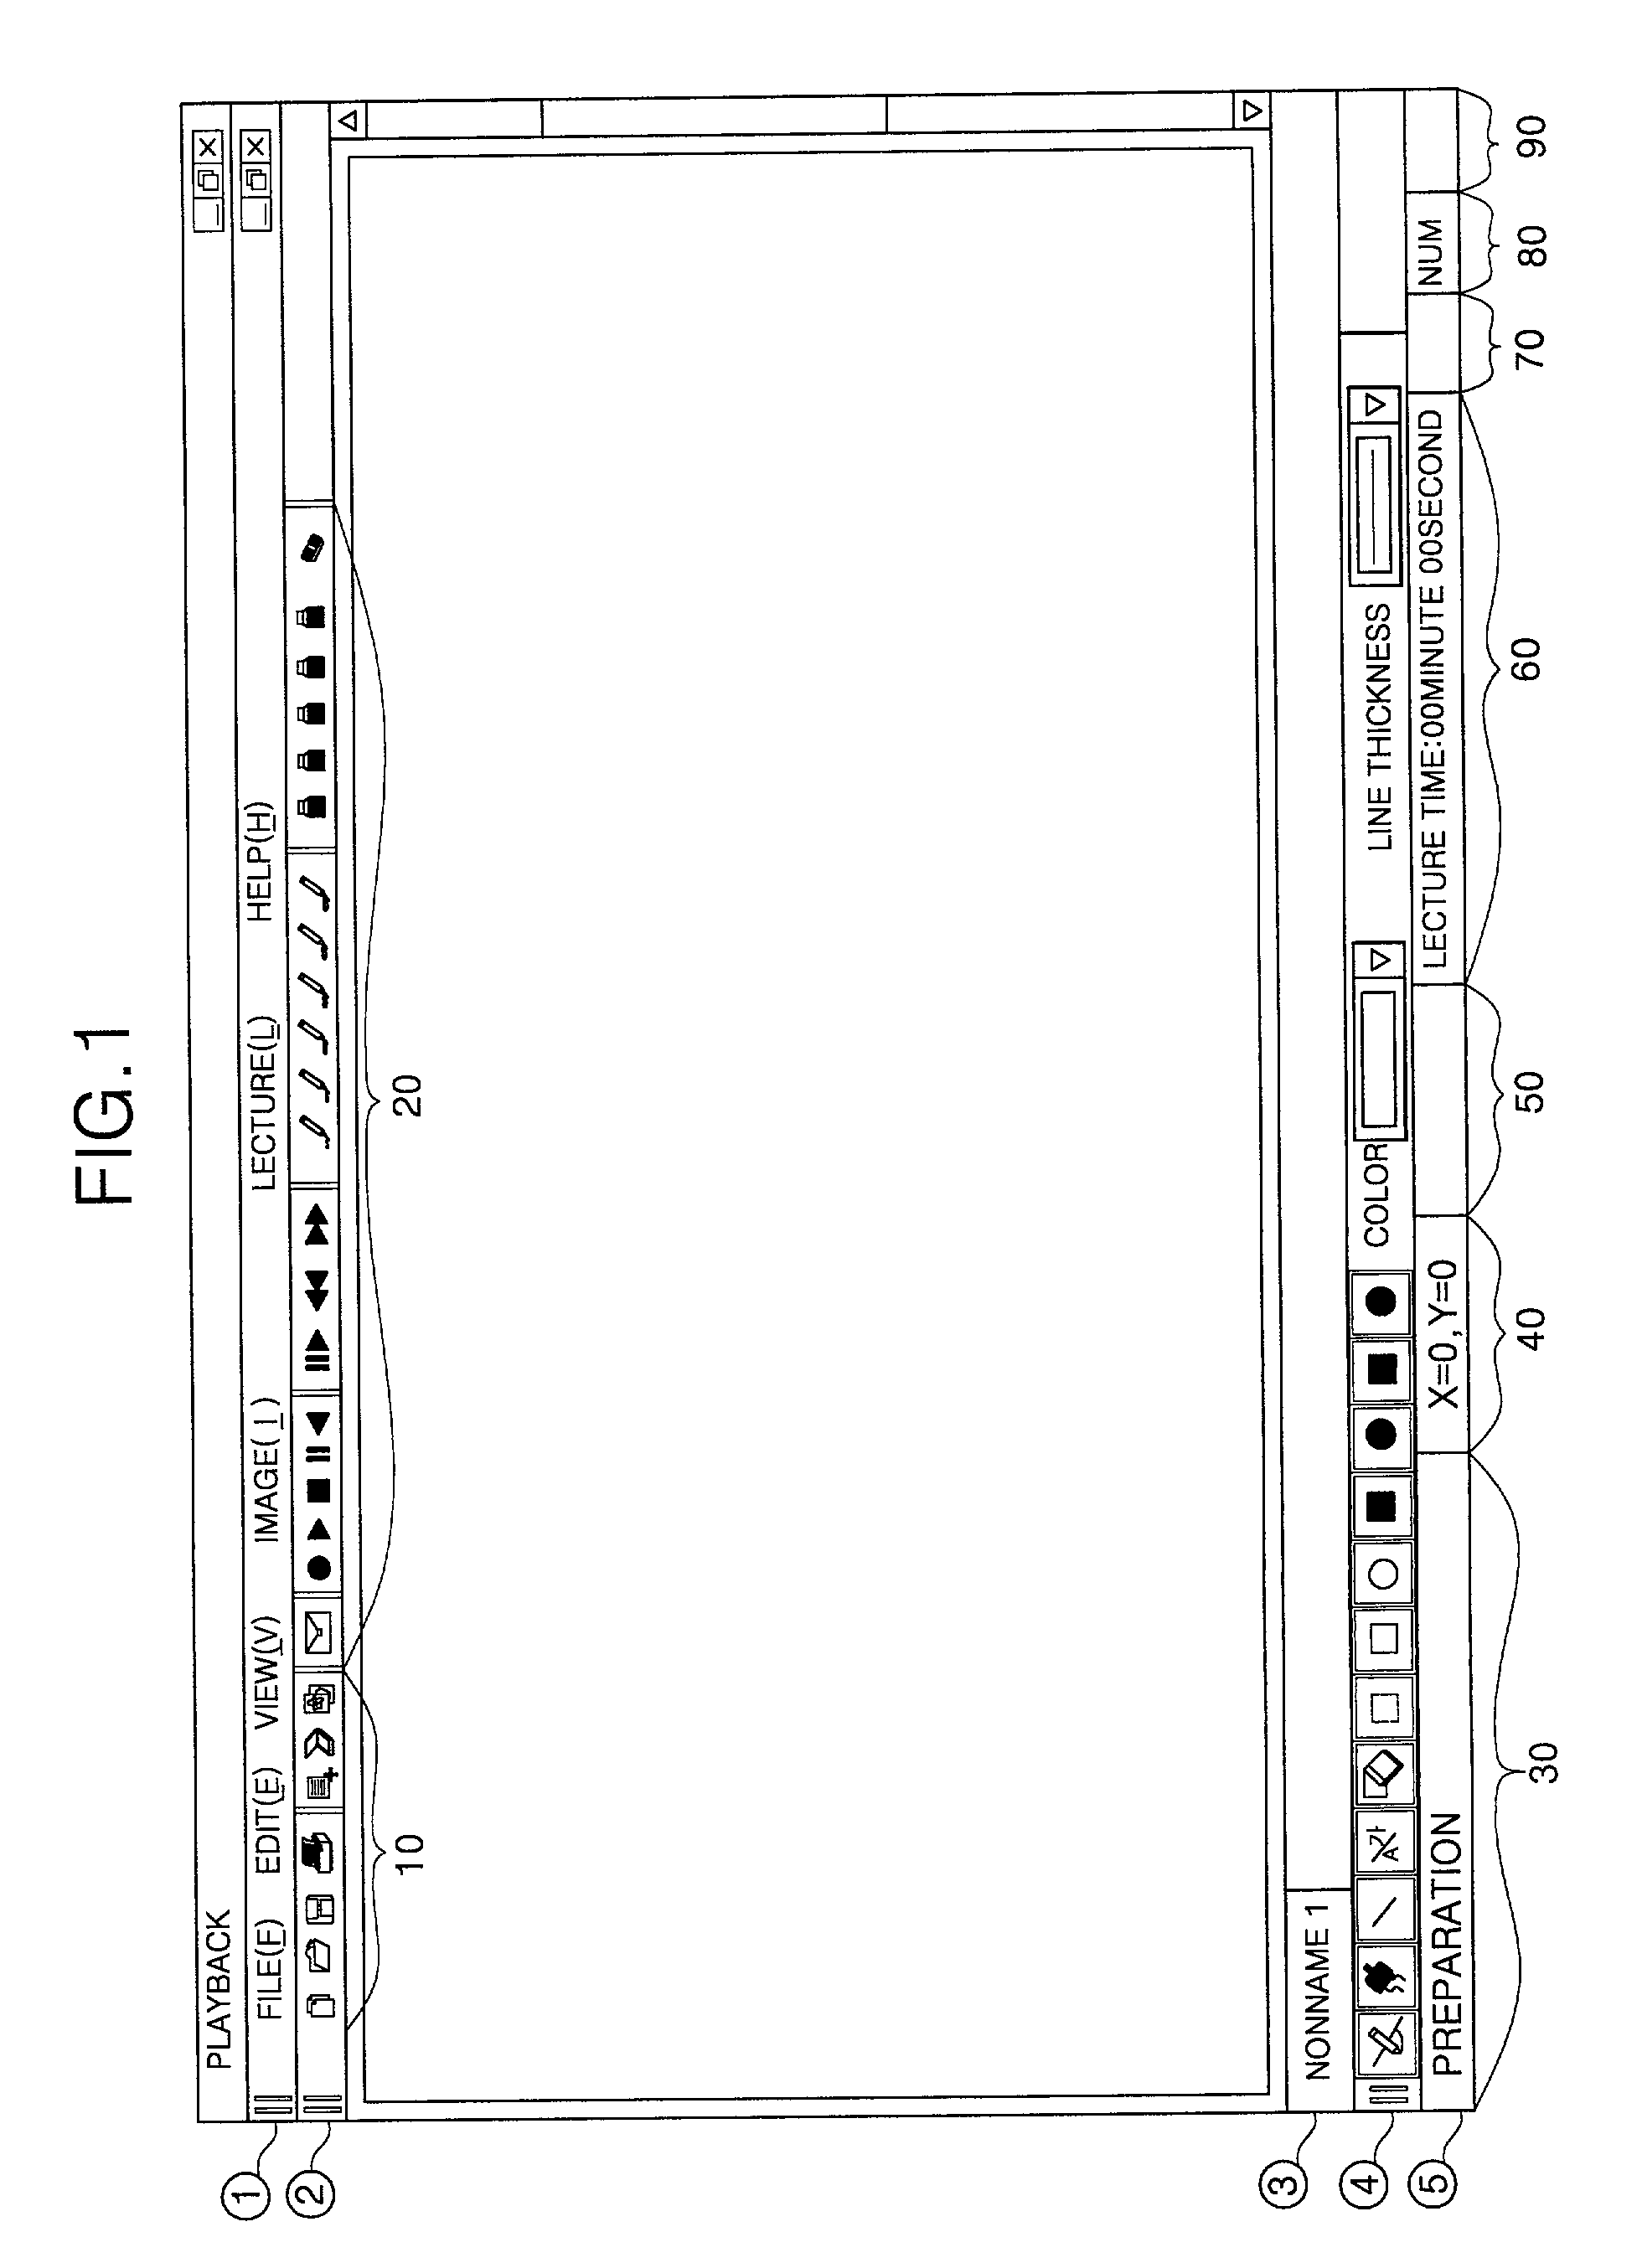 Computer-Based lecture recording and reproducing method